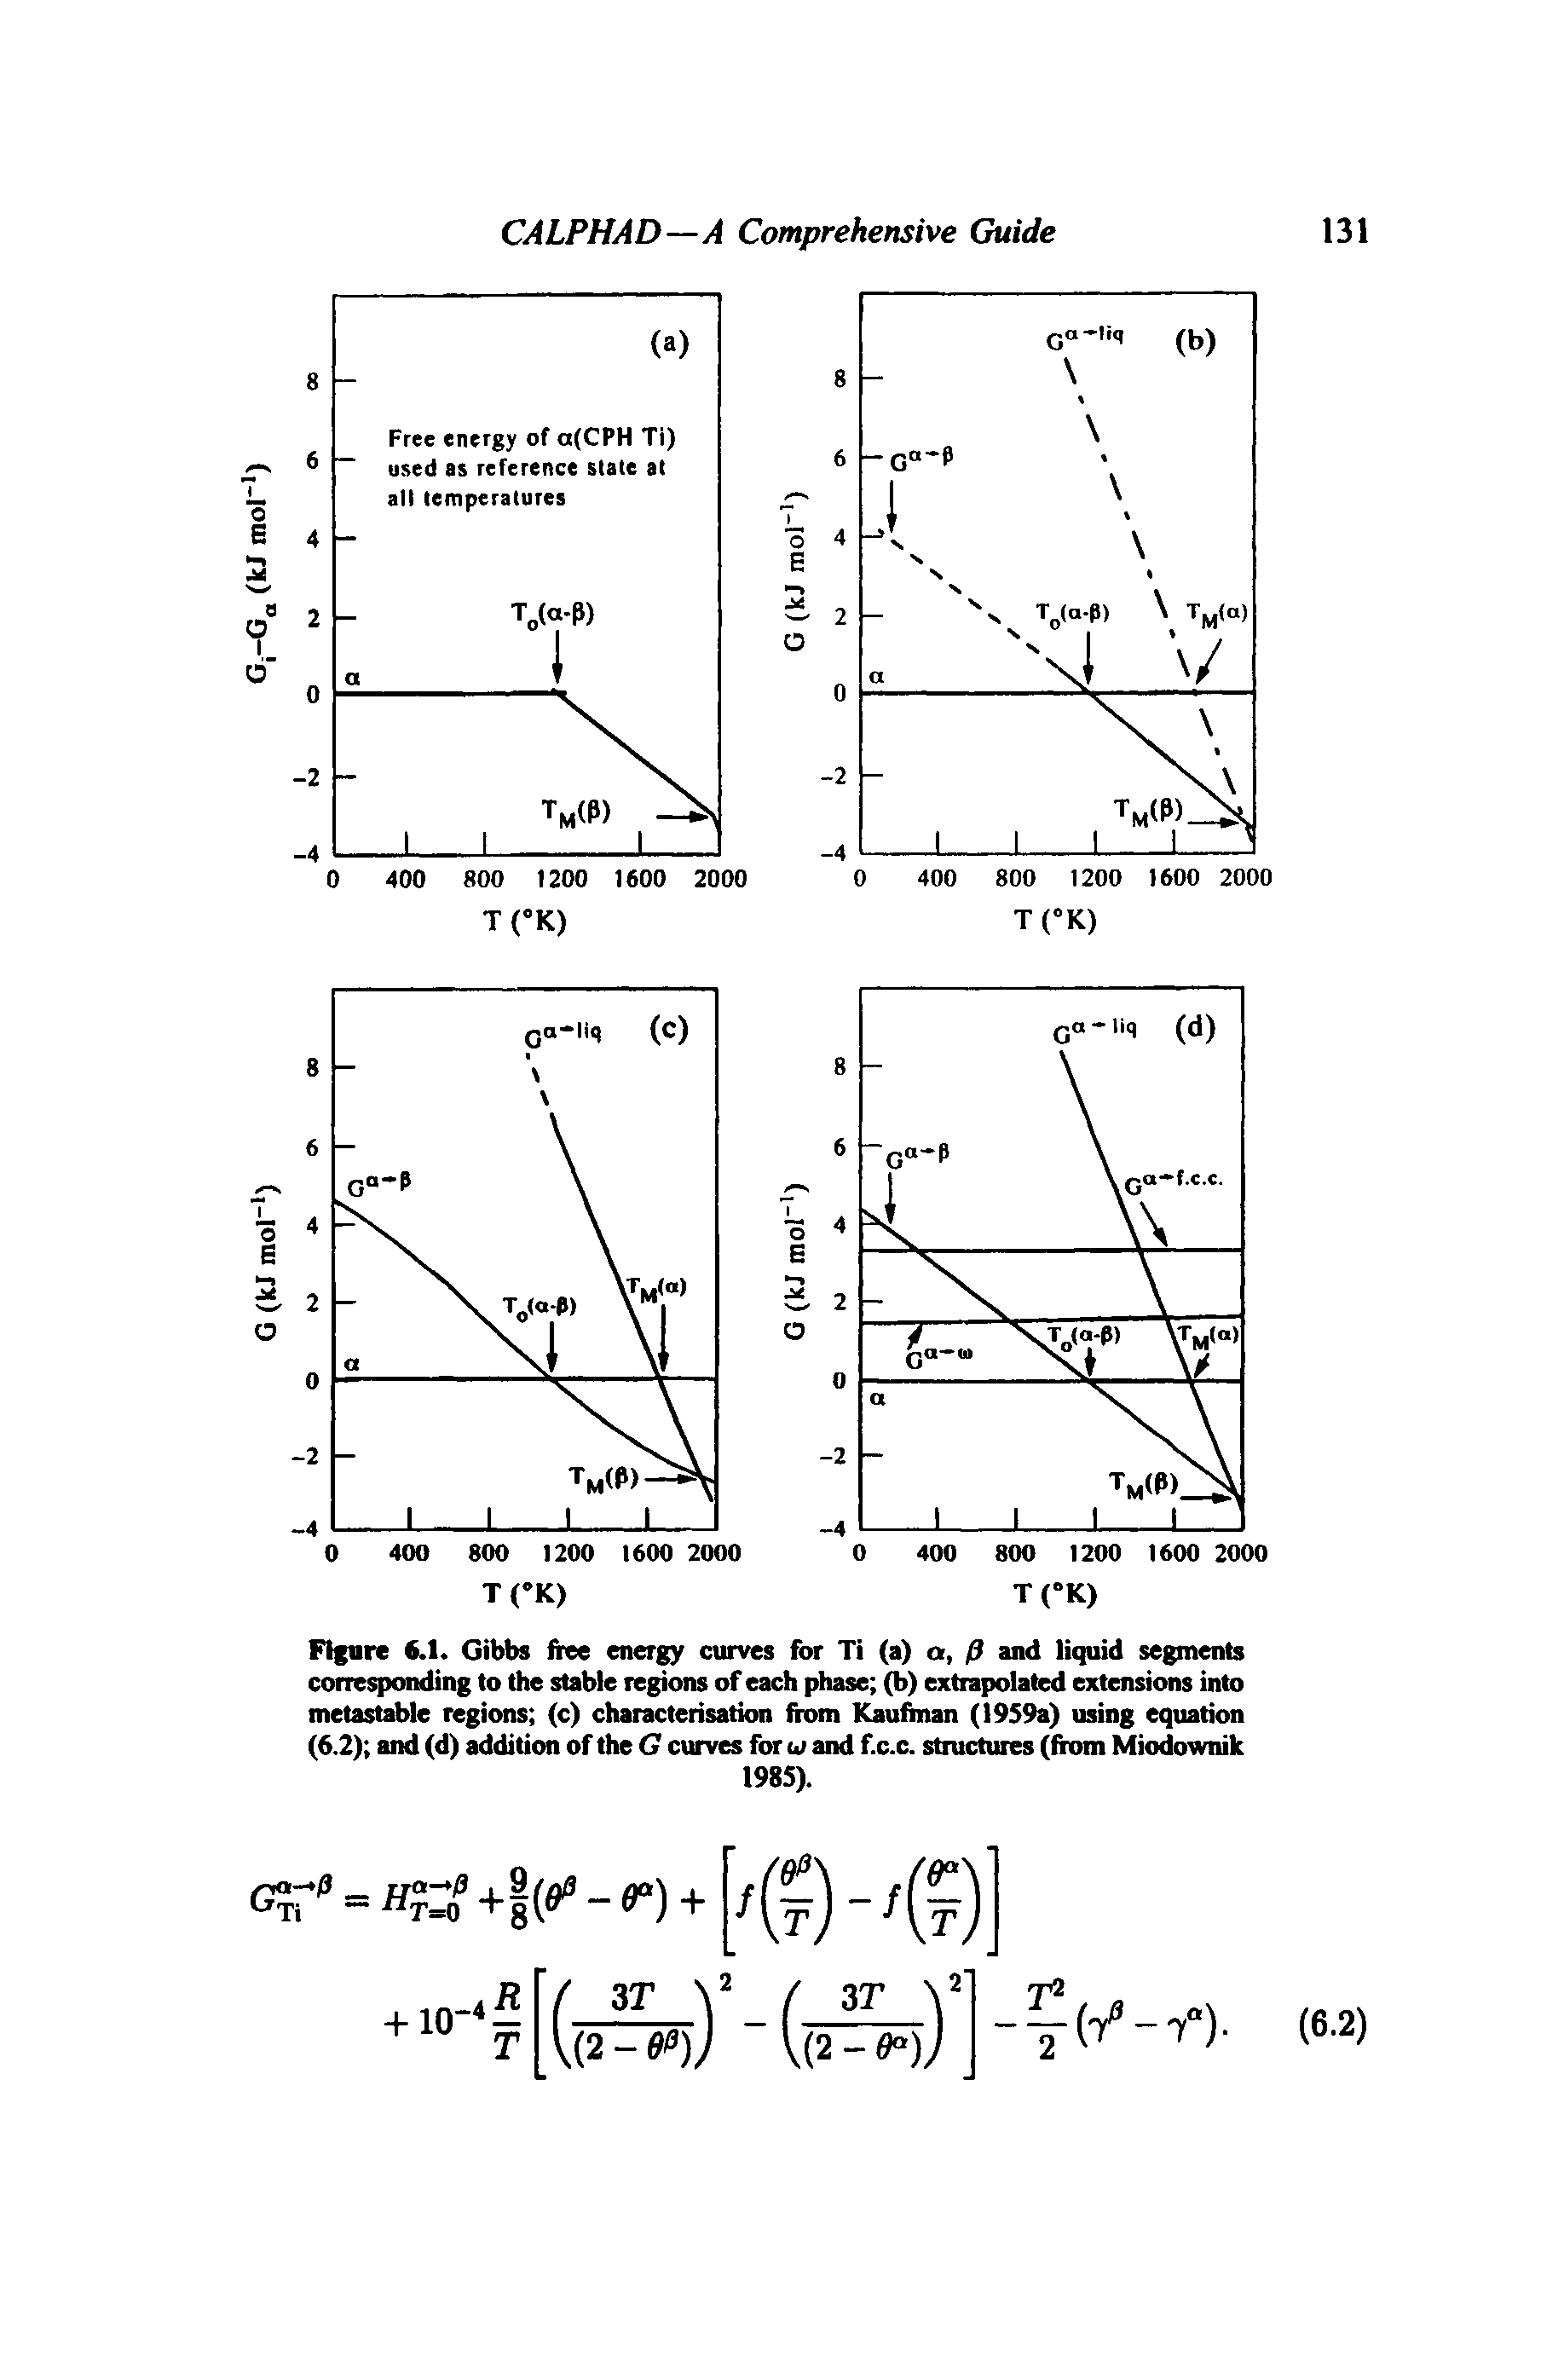 Figure 6.1. Gibbs free energy curves for Ti (a) a, j9 and liquid segments corresponding to the stable regions of each phase (b) extrapolated extensions into metastable regions (c) characterisation from Kaufinan (1959a) using equation (6.2) and (d) addition of the G curves for u and f.c.c. structures (from Miodownik...